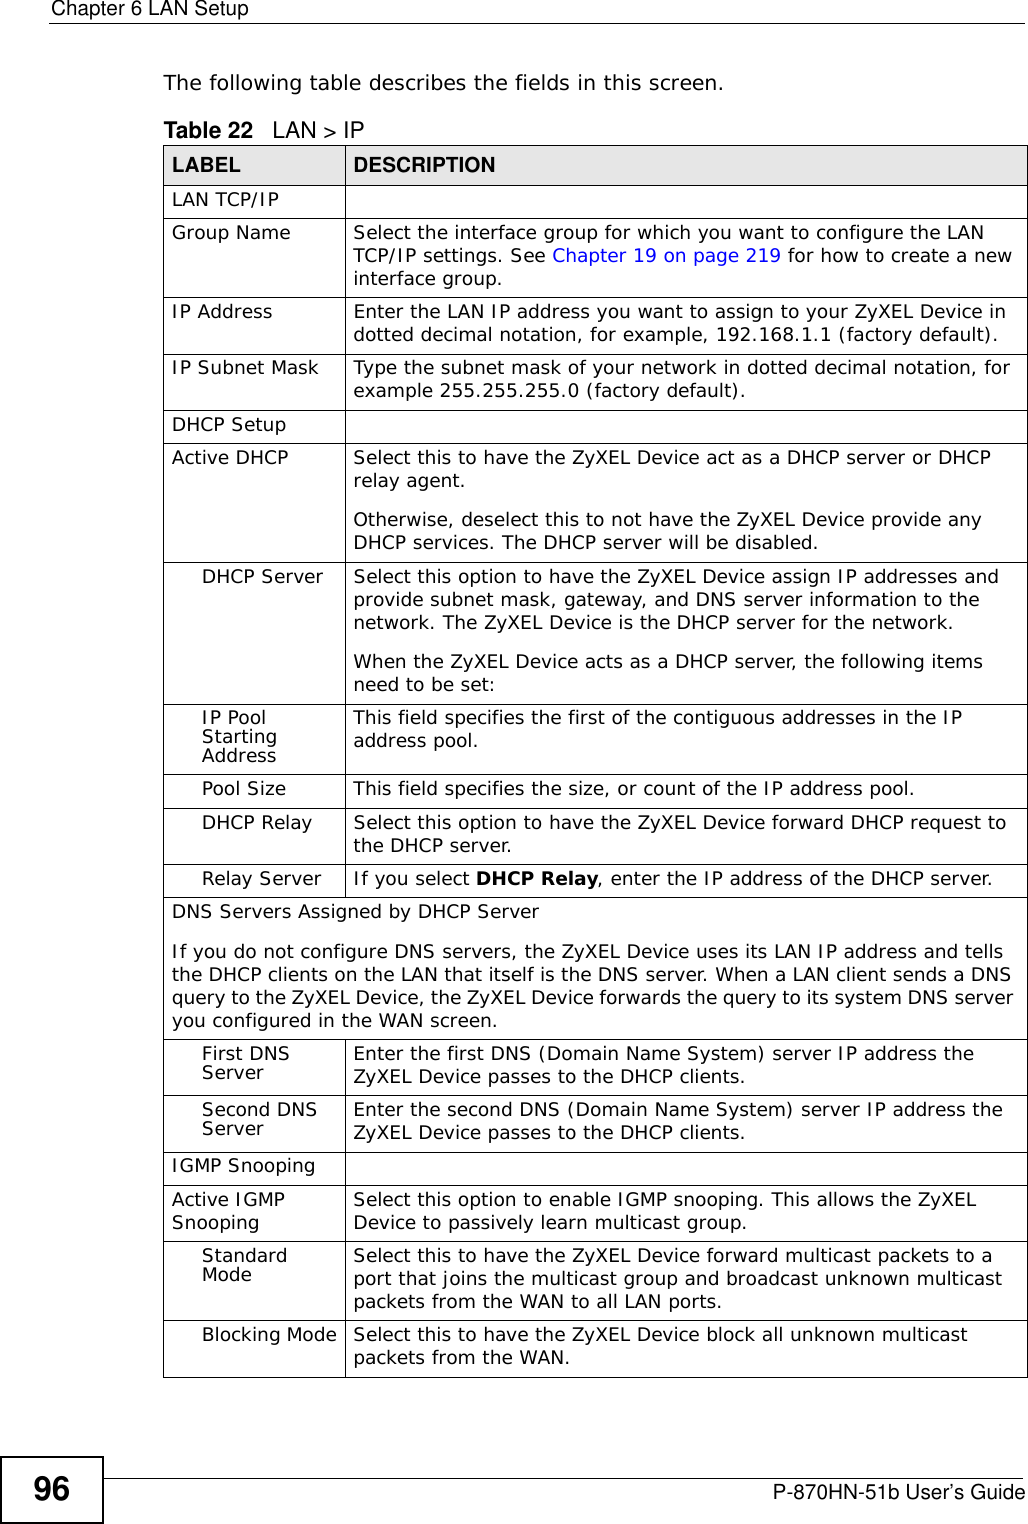 Chapter 6 LAN SetupP-870HN-51b User’s Guide96The following table describes the fields in this screen.  Table 22   LAN &gt; IPLABEL DESCRIPTIONLAN TCP/IPGroup Name Select the interface group for which you want to configure the LAN TCP/IP settings. See Chapter 19 on page 219 for how to create a new interface group.IP Address Enter the LAN IP address you want to assign to your ZyXEL Device in dotted decimal notation, for example, 192.168.1.1 (factory default). IP Subnet Mask  Type the subnet mask of your network in dotted decimal notation, for example 255.255.255.0 (factory default).DHCP SetupActive DHCP  Select this to have the ZyXEL Device act as a DHCP server or DHCP relay agent.Otherwise, deselect this to not have the ZyXEL Device provide any DHCP services. The DHCP server will be disabled. DHCP Server Select this option to have the ZyXEL Device assign IP addresses and provide subnet mask, gateway, and DNS server information to the network. The ZyXEL Device is the DHCP server for the network.When the ZyXEL Device acts as a DHCP server, the following items need to be set: IP Pool Starting AddressThis field specifies the first of the contiguous addresses in the IP address pool.Pool Size This field specifies the size, or count of the IP address pool.DHCP Relay Select this option to have the ZyXEL Device forward DHCP request to the DHCP server. Relay Server If you select DHCP Relay, enter the IP address of the DHCP server.DNS Servers Assigned by DHCP ServerIf you do not configure DNS servers, the ZyXEL Device uses its LAN IP address and tells the DHCP clients on the LAN that itself is the DNS server. When a LAN client sends a DNS query to the ZyXEL Device, the ZyXEL Device forwards the query to its system DNS server you configured in the WAN screen.First DNS Server Enter the first DNS (Domain Name System) server IP address the ZyXEL Device passes to the DHCP clients. Second DNS Server Enter the second DNS (Domain Name System) server IP address the ZyXEL Device passes to the DHCP clients. IGMP SnoopingActive IGMP Snooping Select this option to enable IGMP snooping. This allows the ZyXEL Device to passively learn multicast group.Standard Mode Select this to have the ZyXEL Device forward multicast packets to a port that joins the multicast group and broadcast unknown multicast packets from the WAN to all LAN ports.Blocking Mode Select this to have the ZyXEL Device block all unknown multicast packets from the WAN.